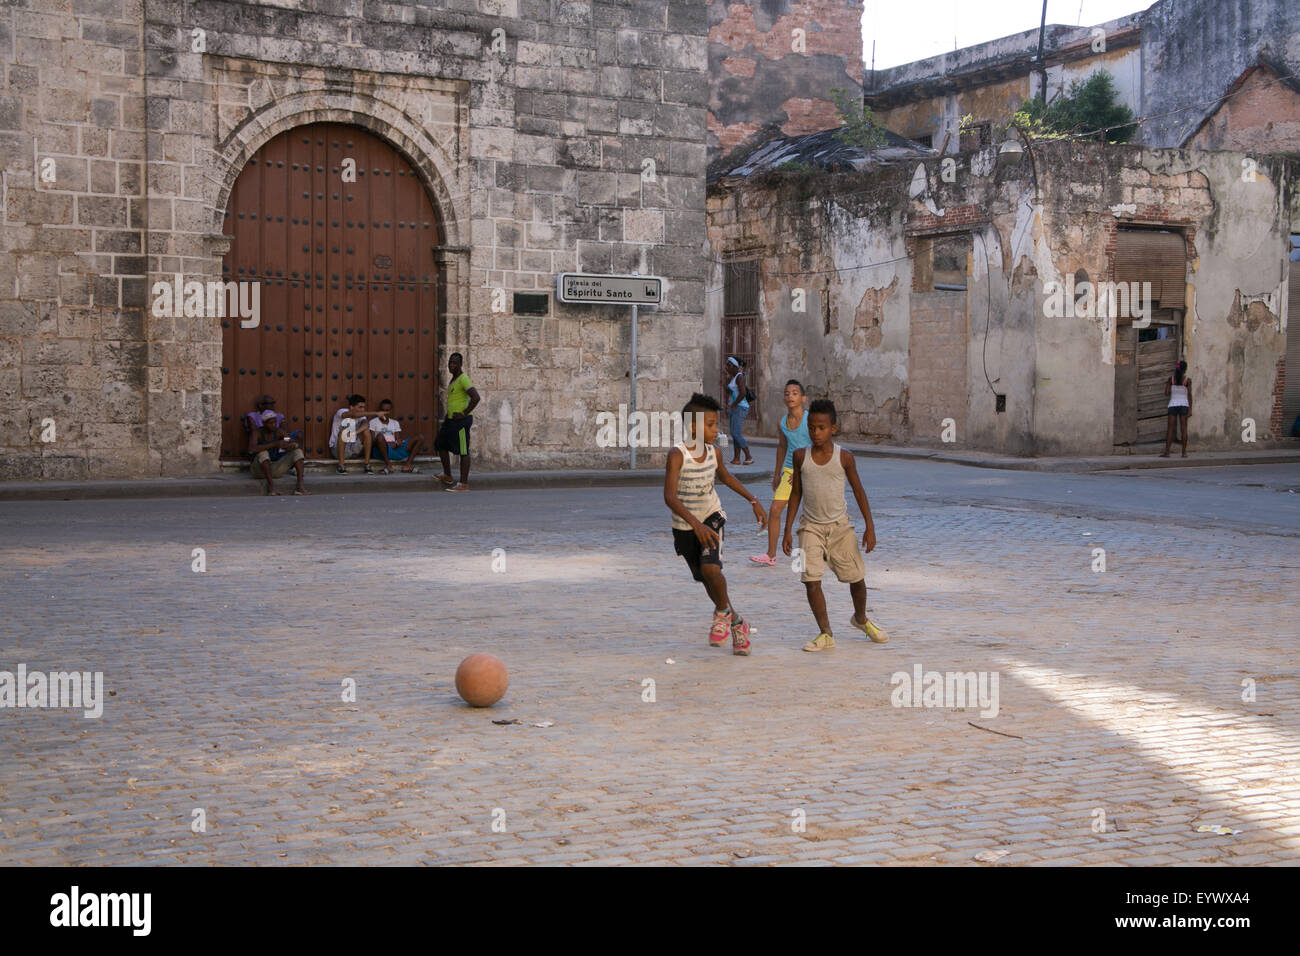 Kids playing soccer in an empty square in Old Havana, Cuba. Stock Photo